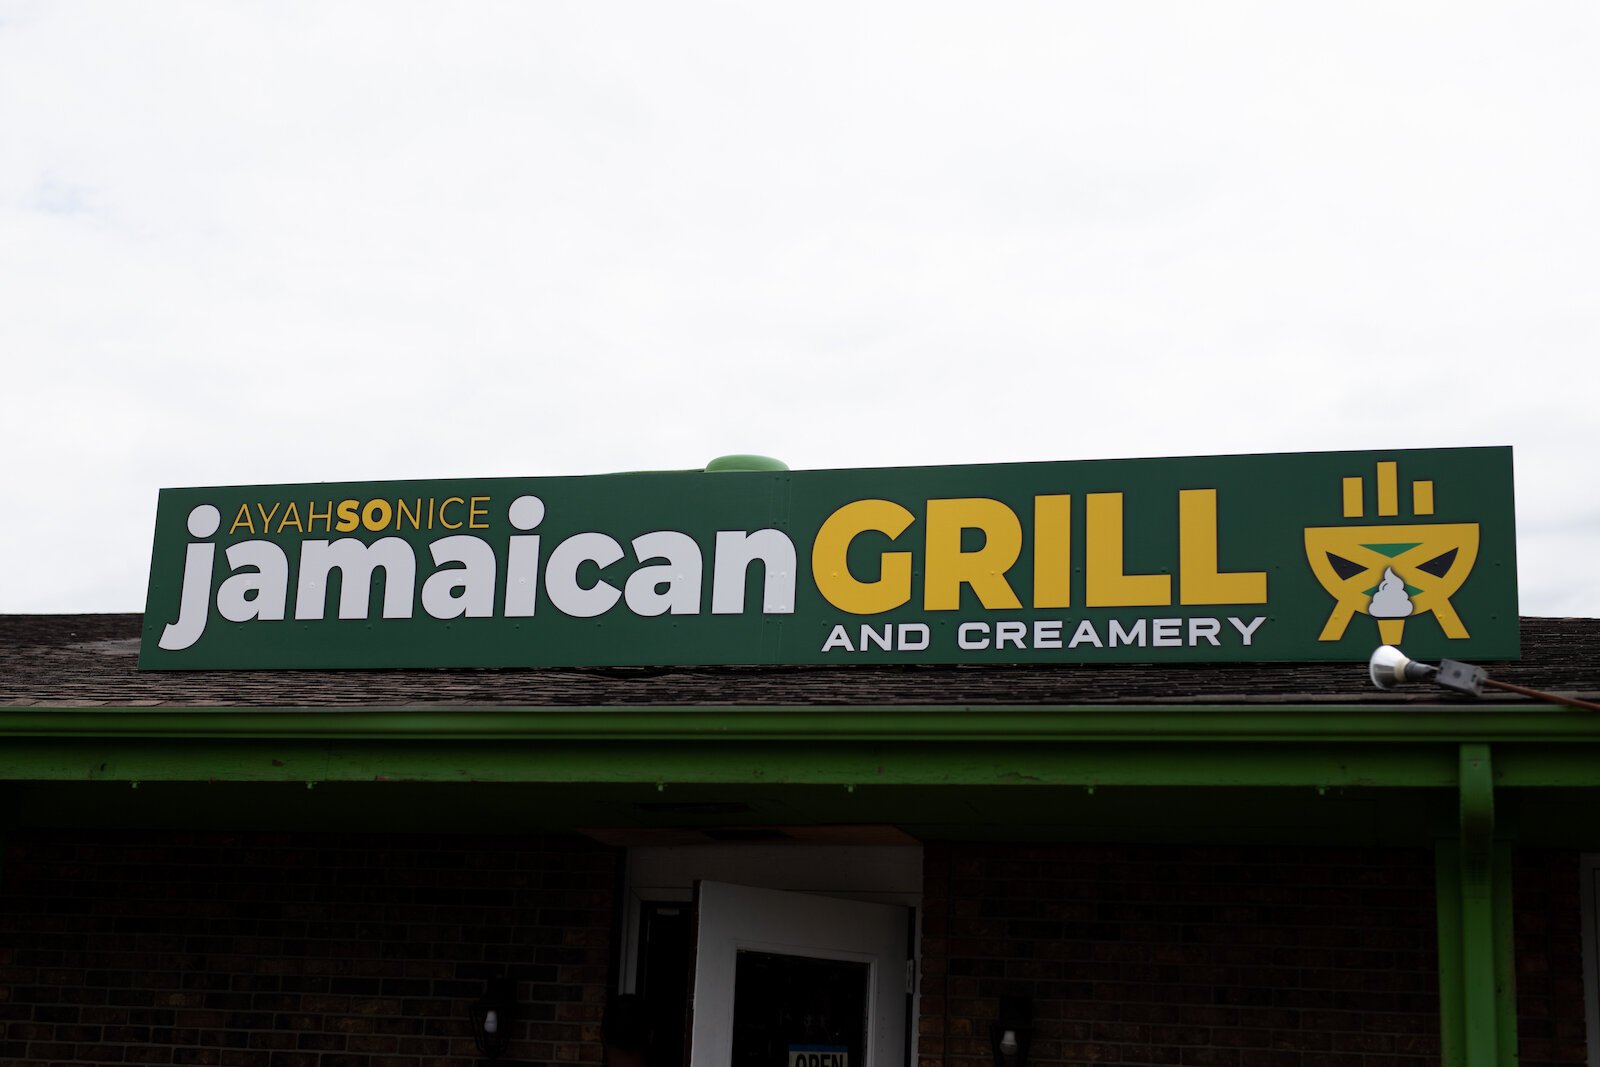 Ayahso Nice Jamaican Grill & Creamery is located at 5921 Hessen Cassel Rd.